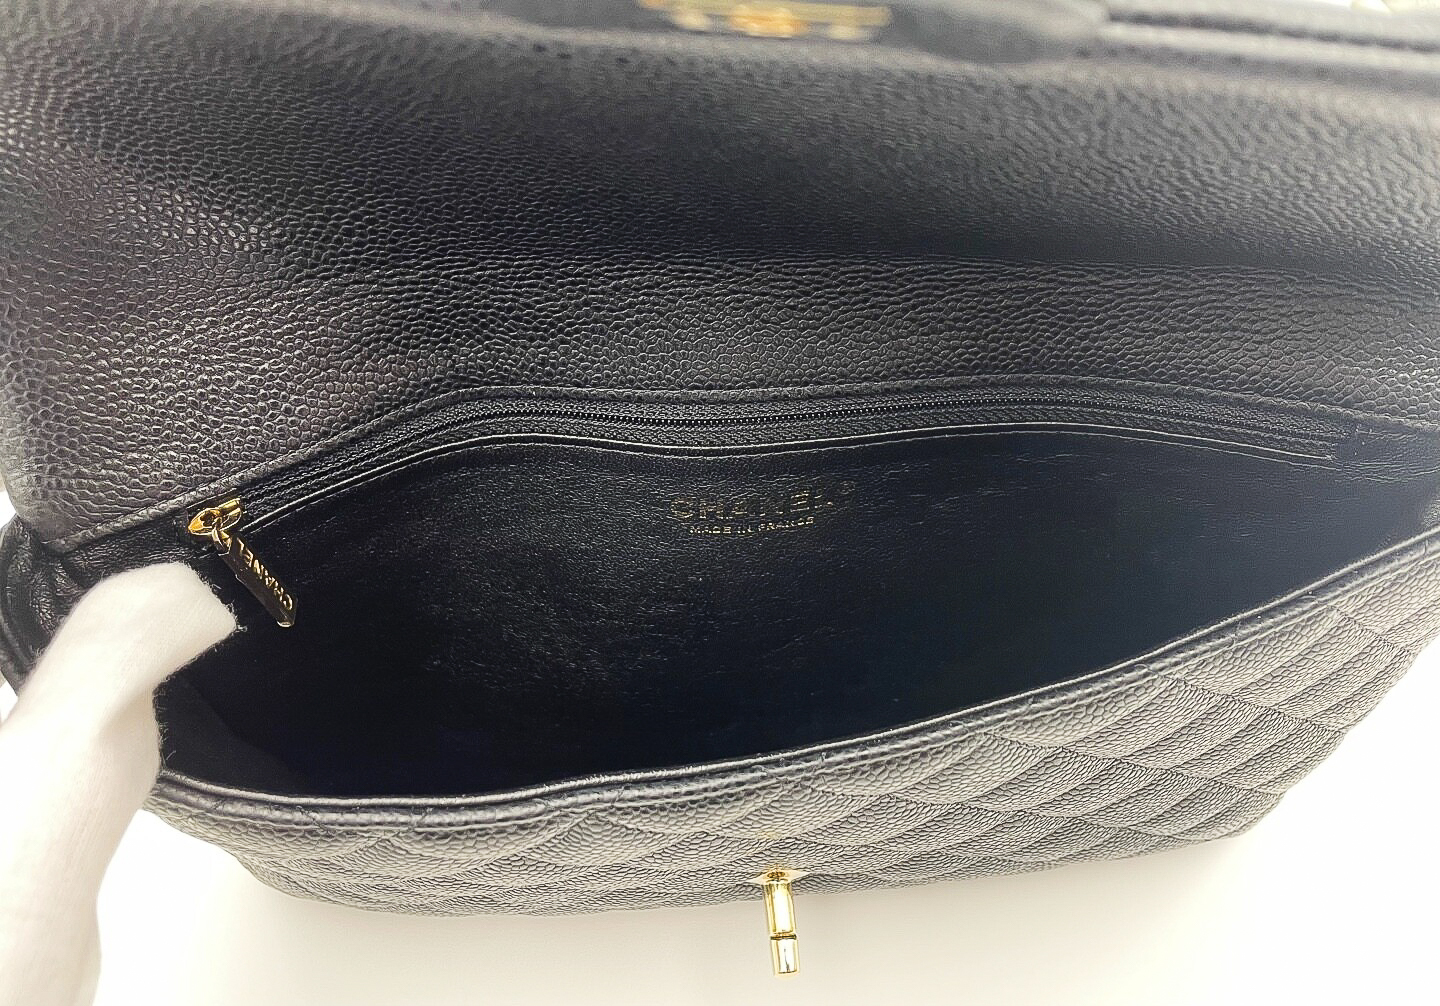 Chanel Clutch, Black Caviar with Gold Hardware, Preowned in Dustbag GA001